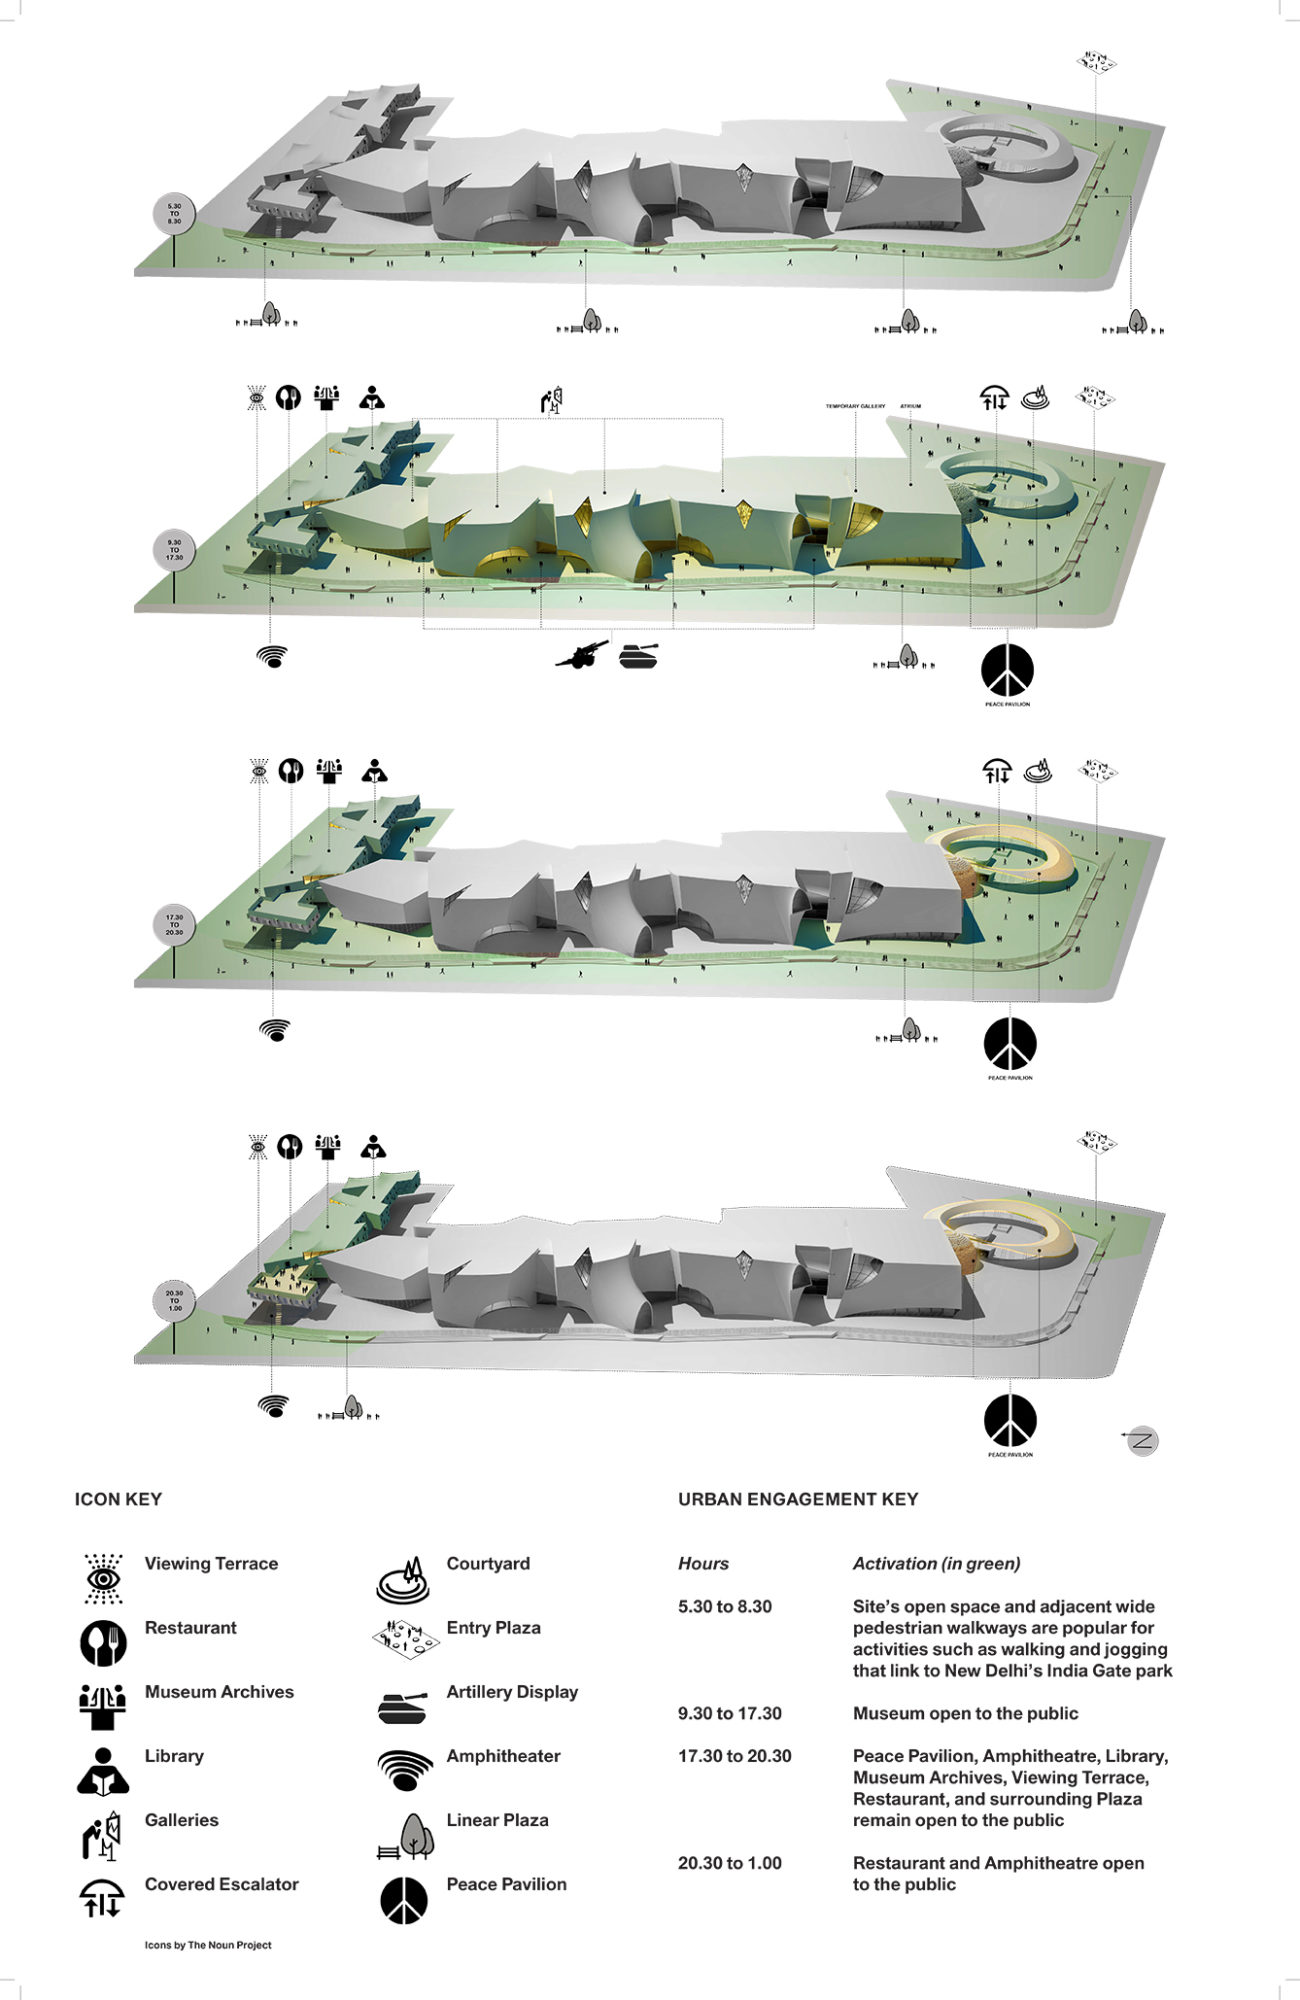 A set of digital models of the Peace Pavilion structure, a sprawling building surrounded by green space, with four different renderings highlighting in green different parts of the structure and the landscape.